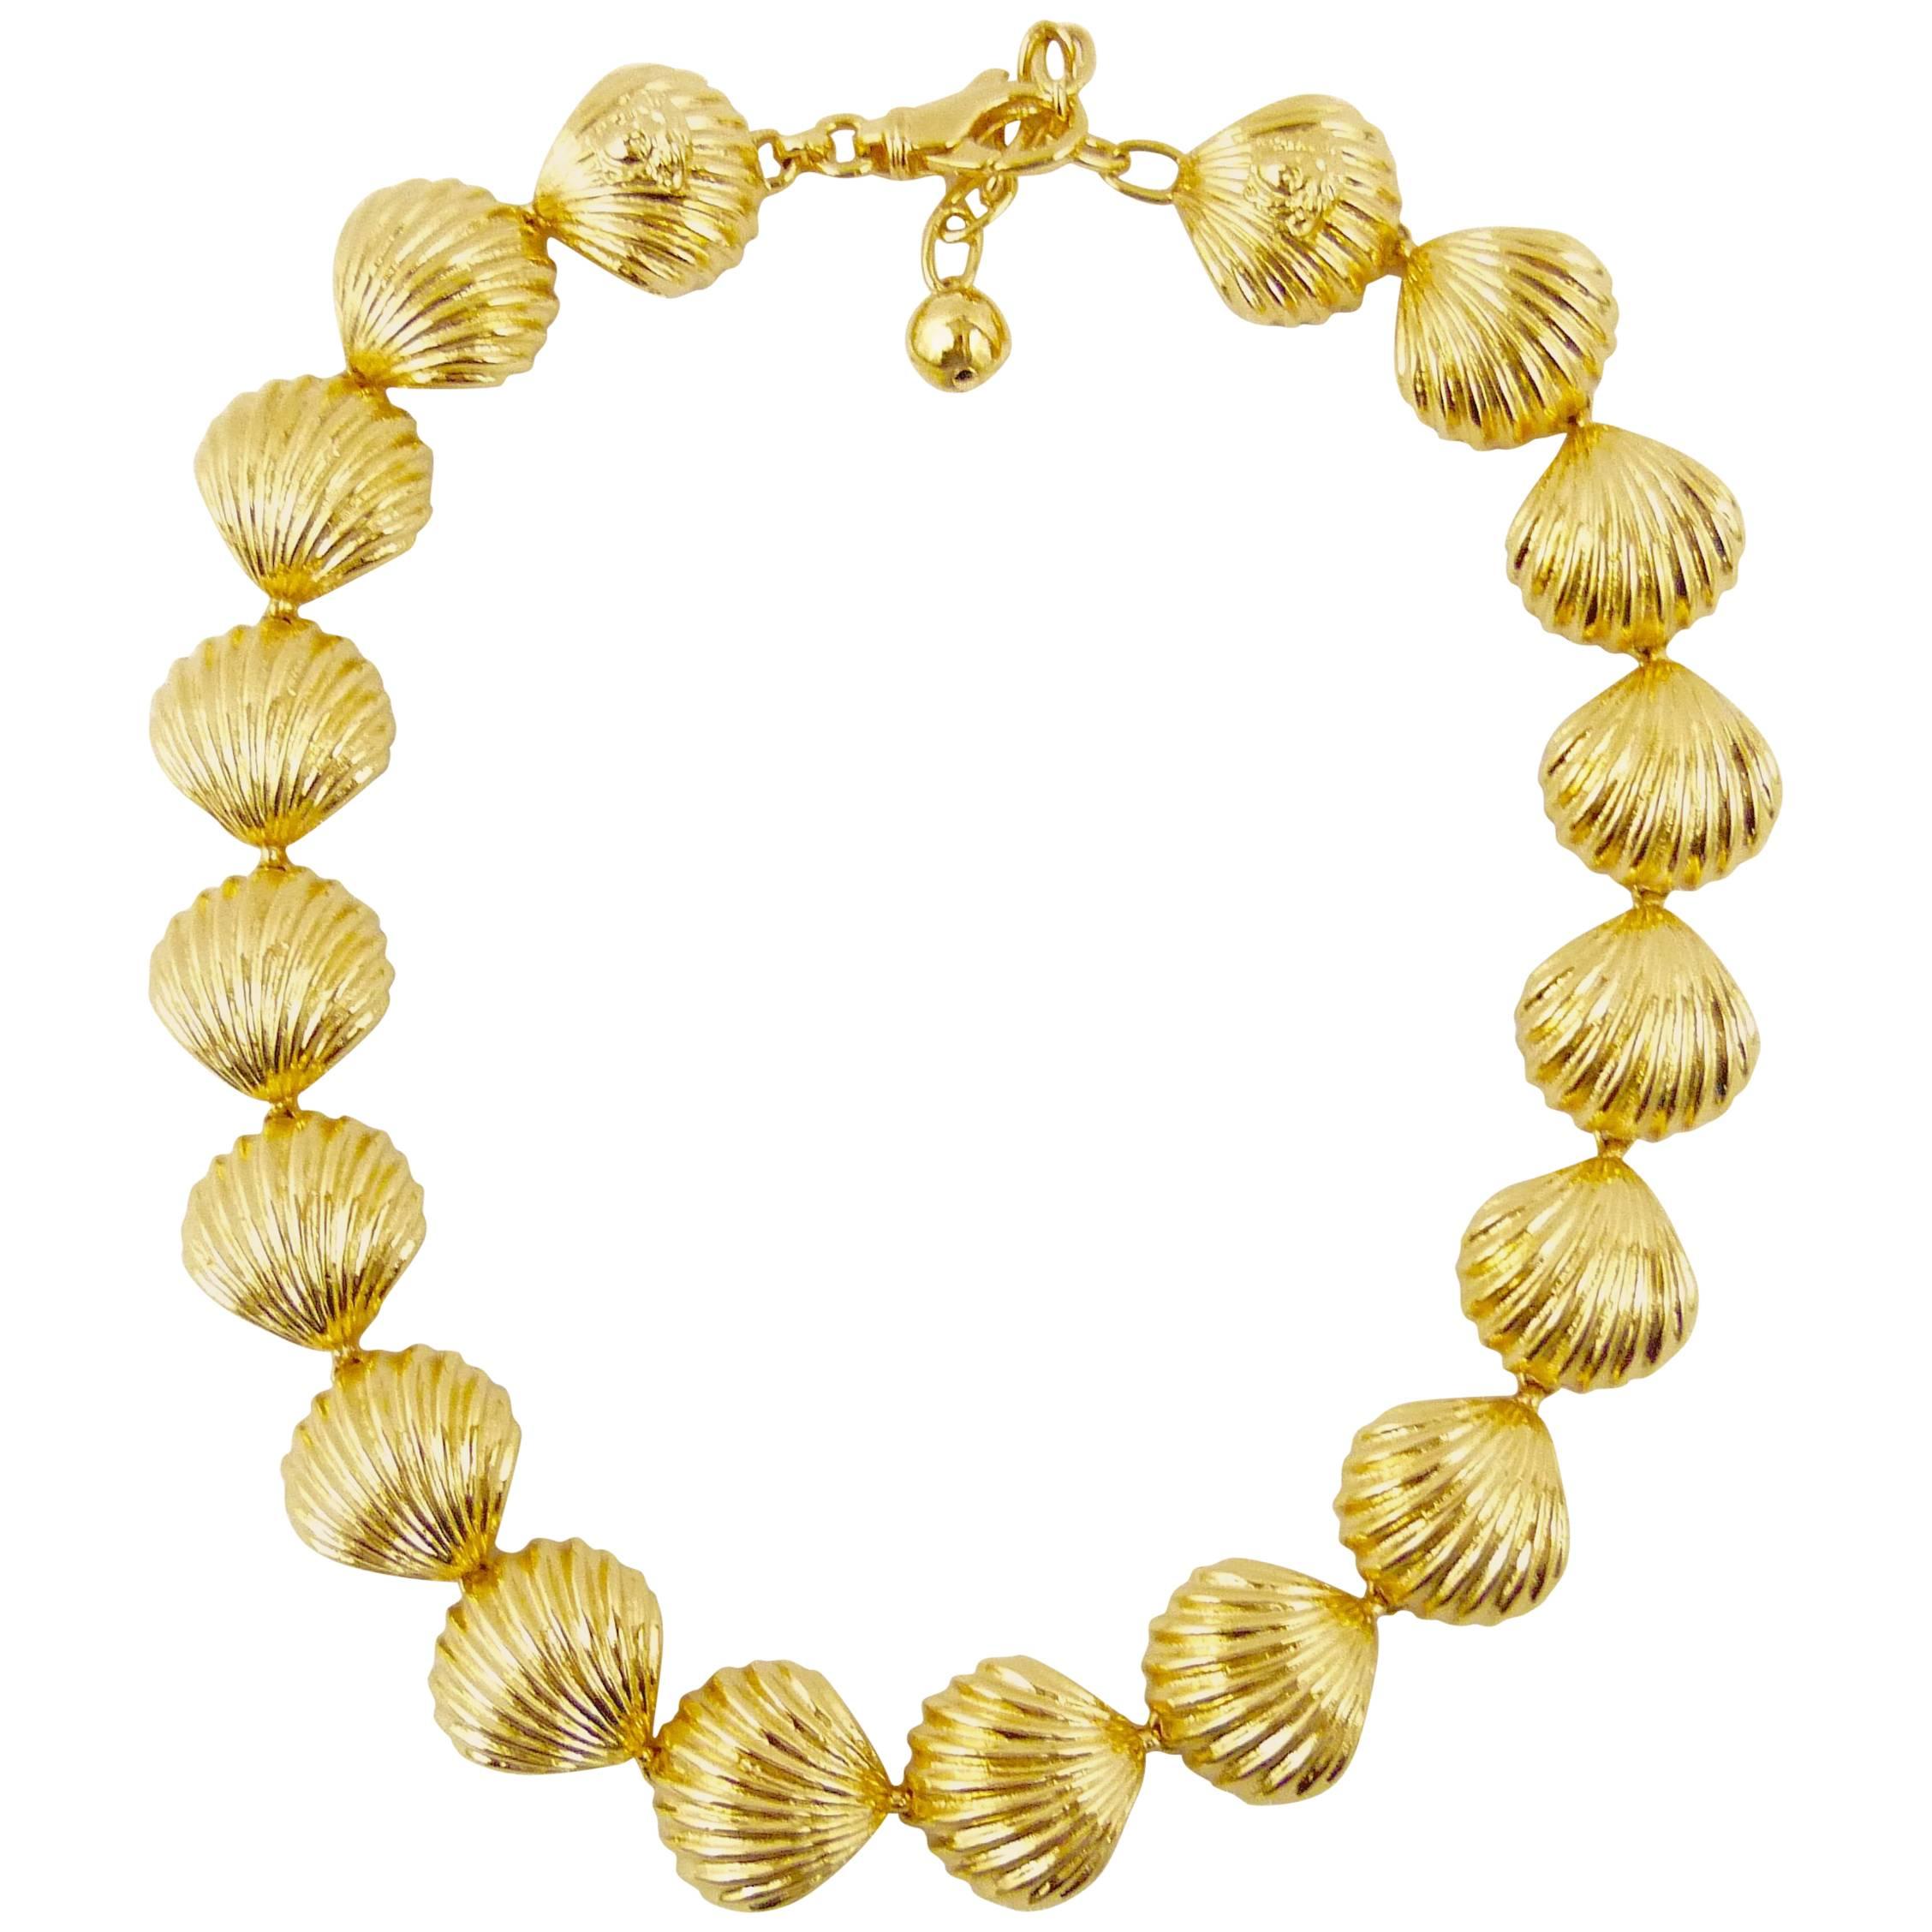 Gianni Versace 1990's gold tone shell necklace